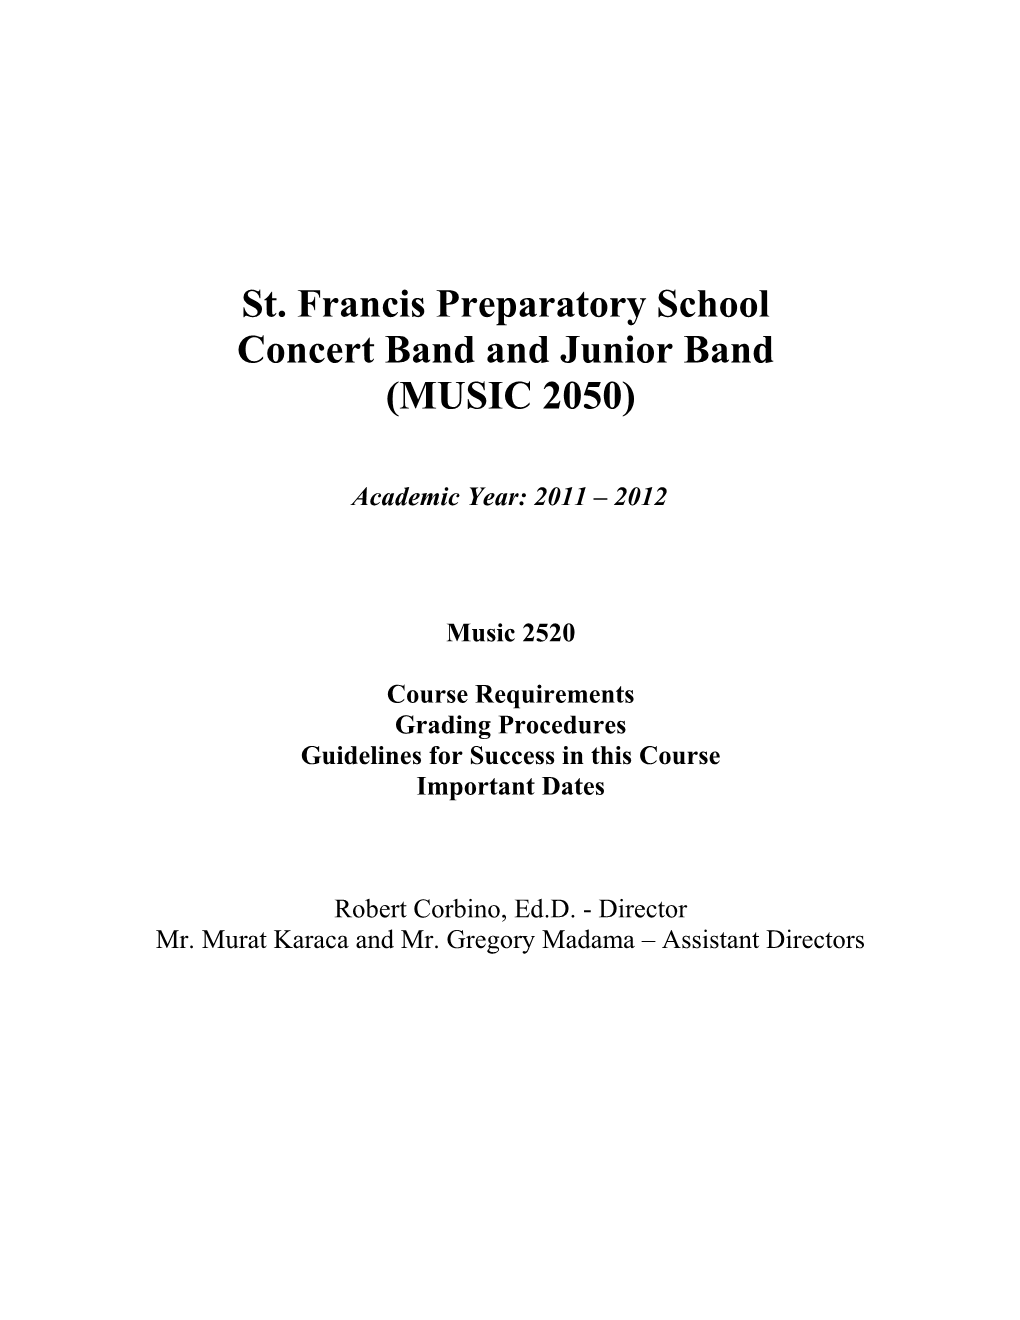 Concert Band and Junior Band